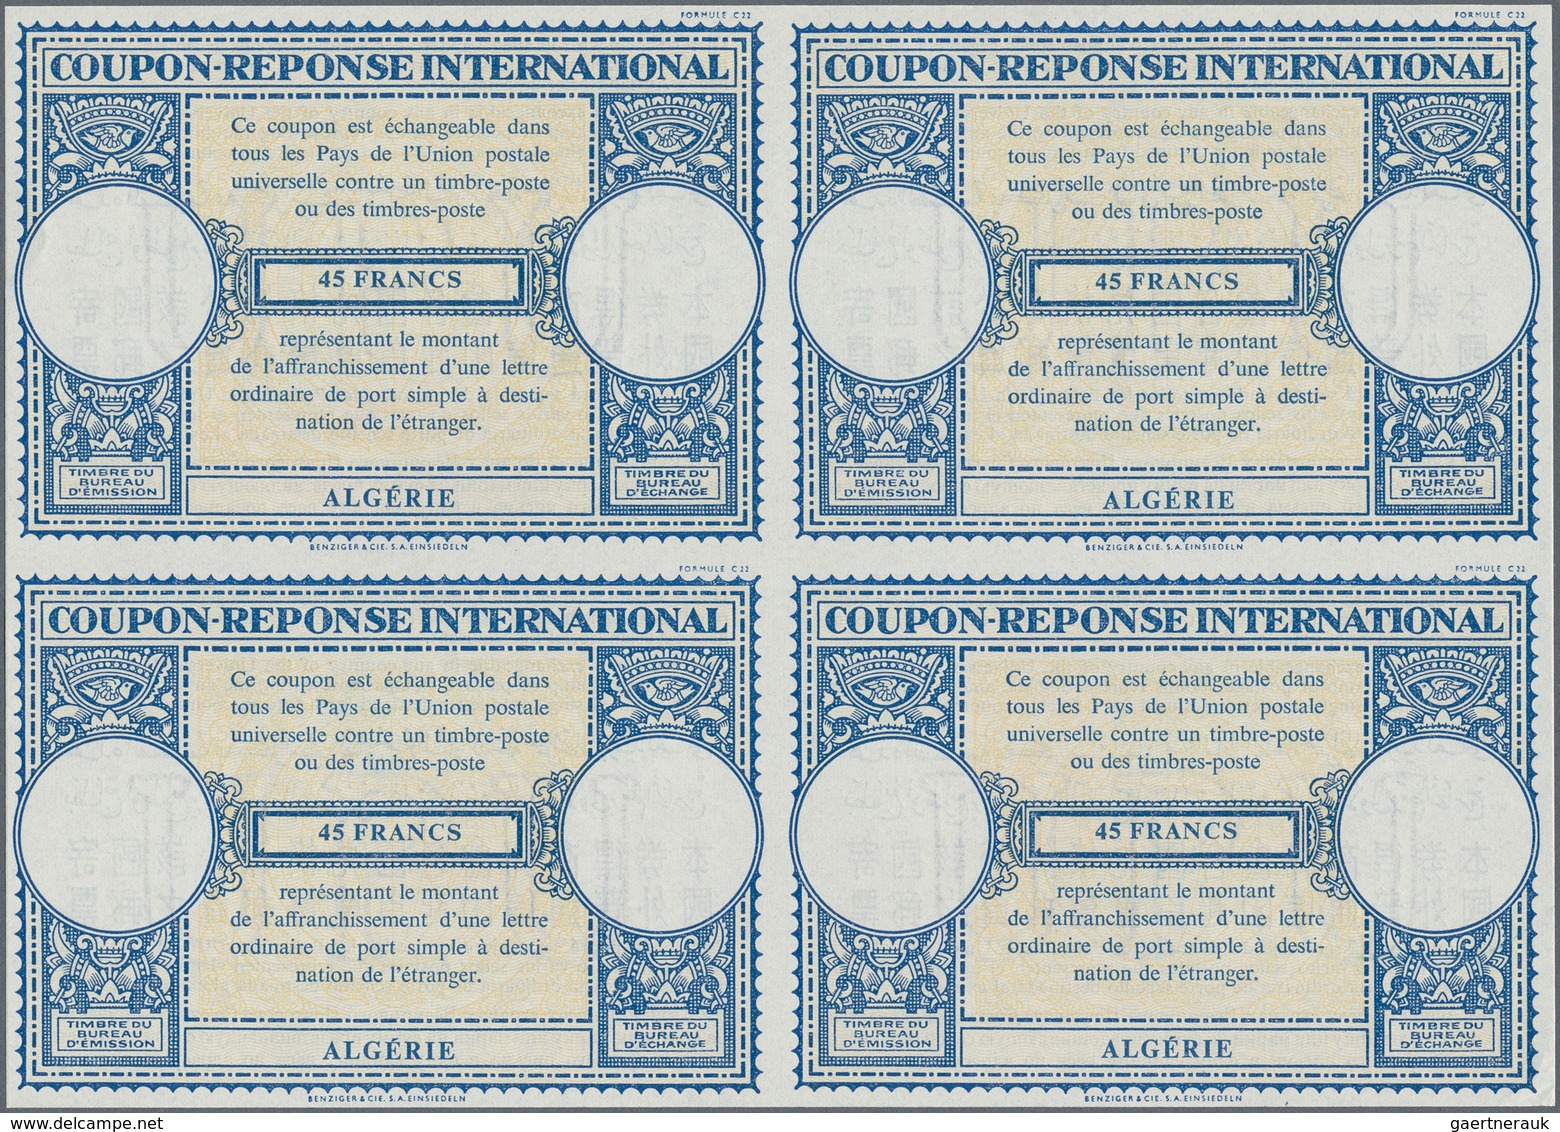 Algerien: 1950s (approx). International Reply Coupon 45 Francs (London Type) In An Unused Block Of 4 - Briefe U. Dokumente